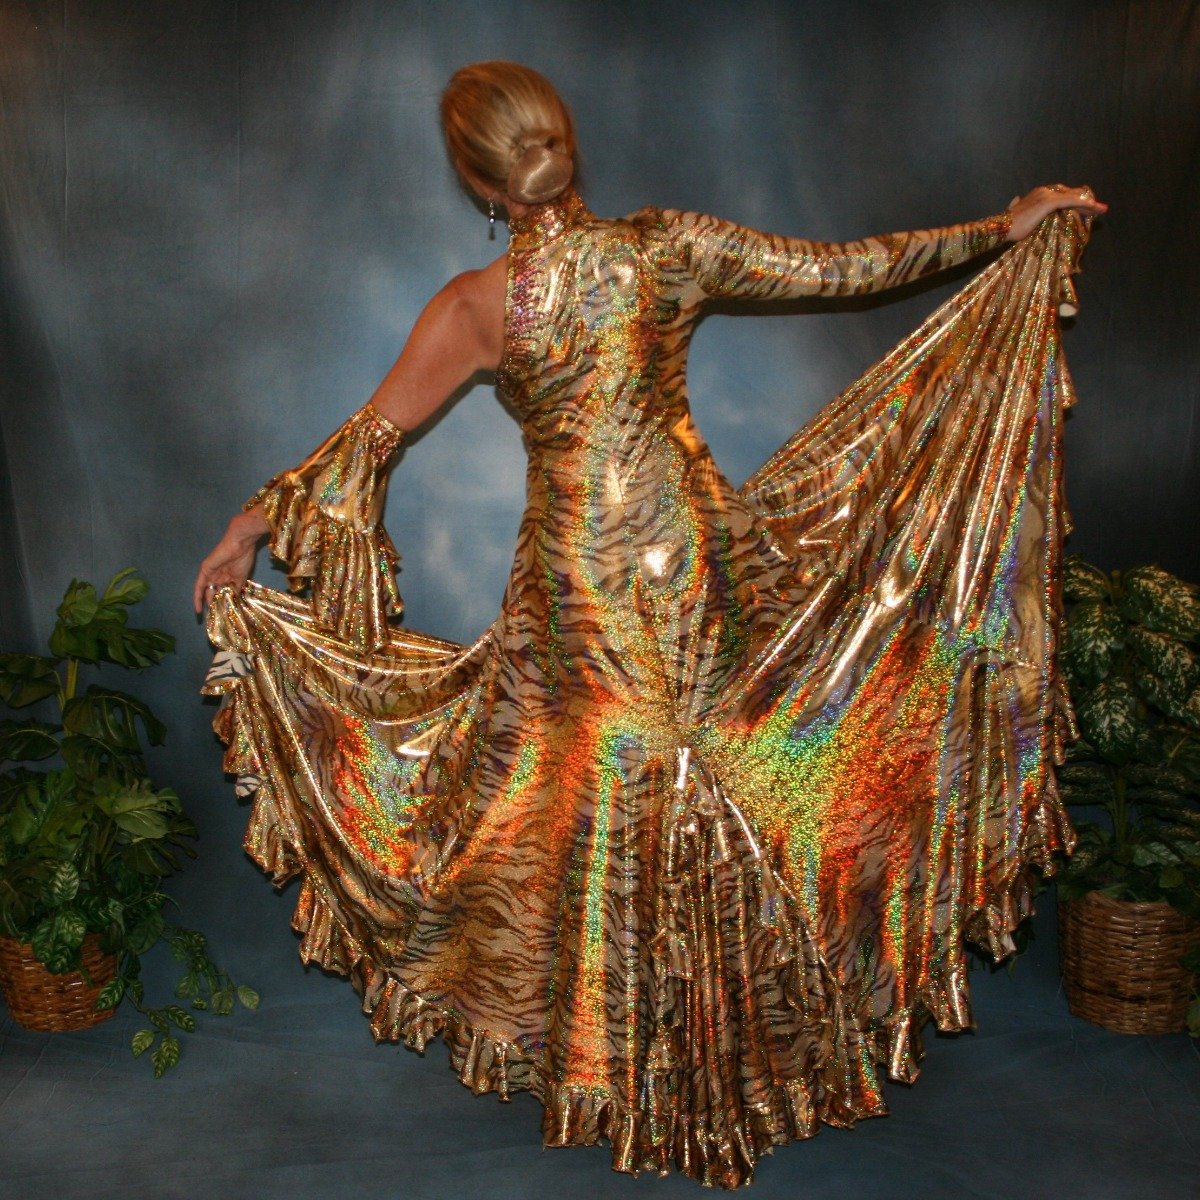 Crystal's Creations back view of gold tango/paso doble dress created of gold hologram tiger print lycra with many flounces & volcano colored Swarovski rhinestone work size 5/6-9/10